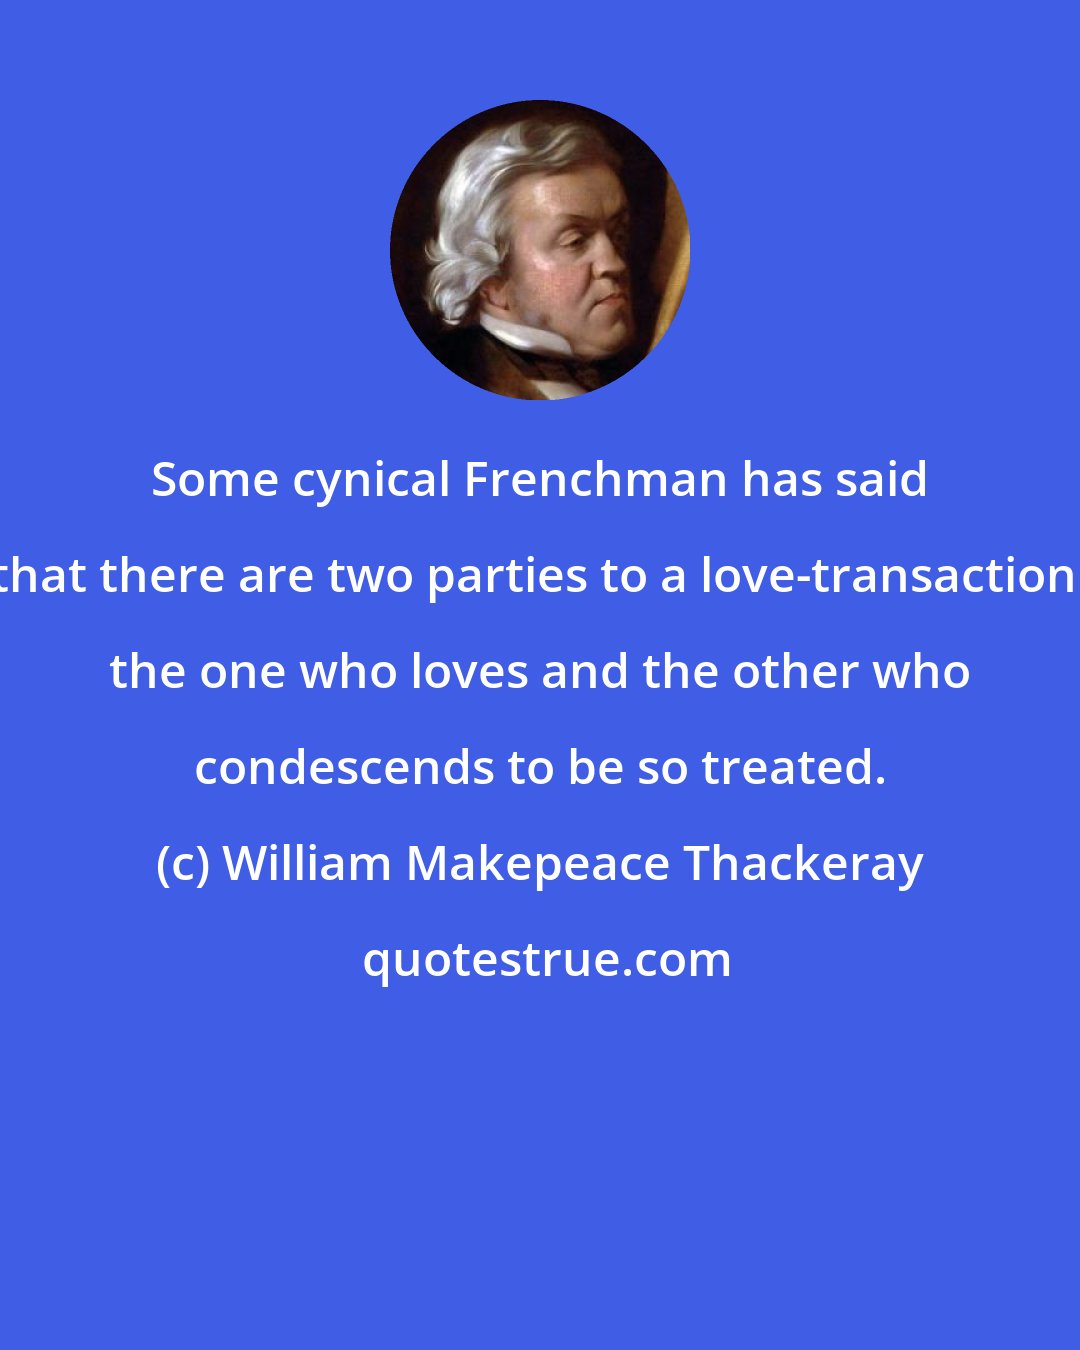 William Makepeace Thackeray: Some cynical Frenchman has said that there are two parties to a love-transaction: the one who loves and the other who condescends to be so treated.